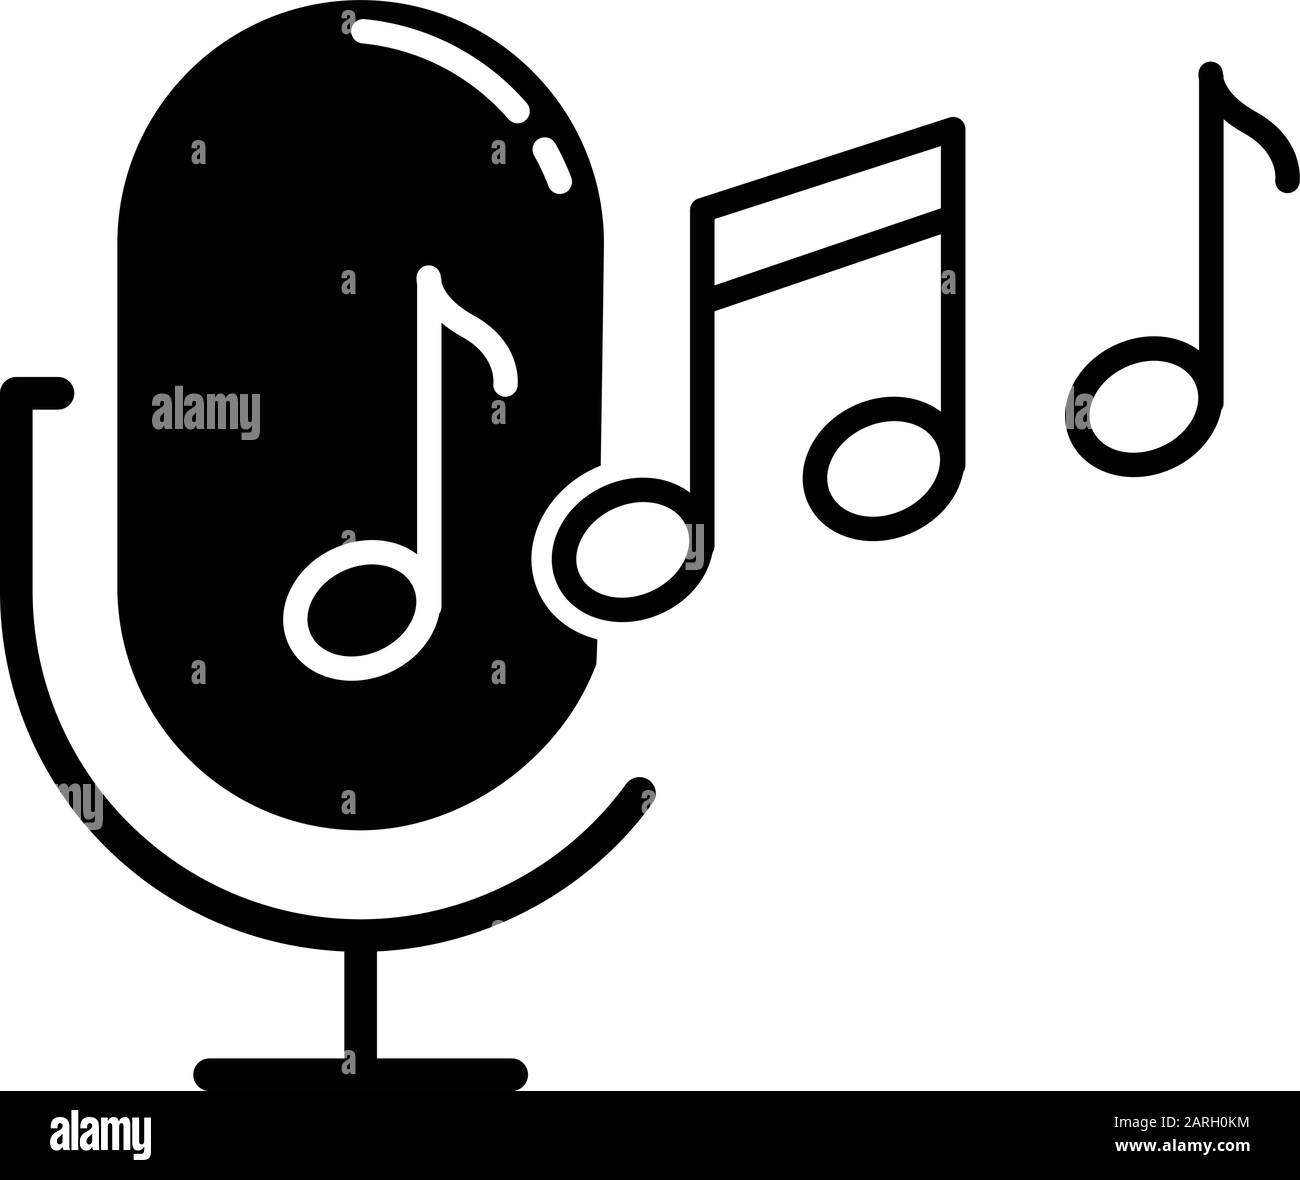 Ringtone recognition glyph icon. Melody definition app. Sound recorded. Microphone and notes, music equipment. Voice command. Silhouette symbol. Negat Stock Vector